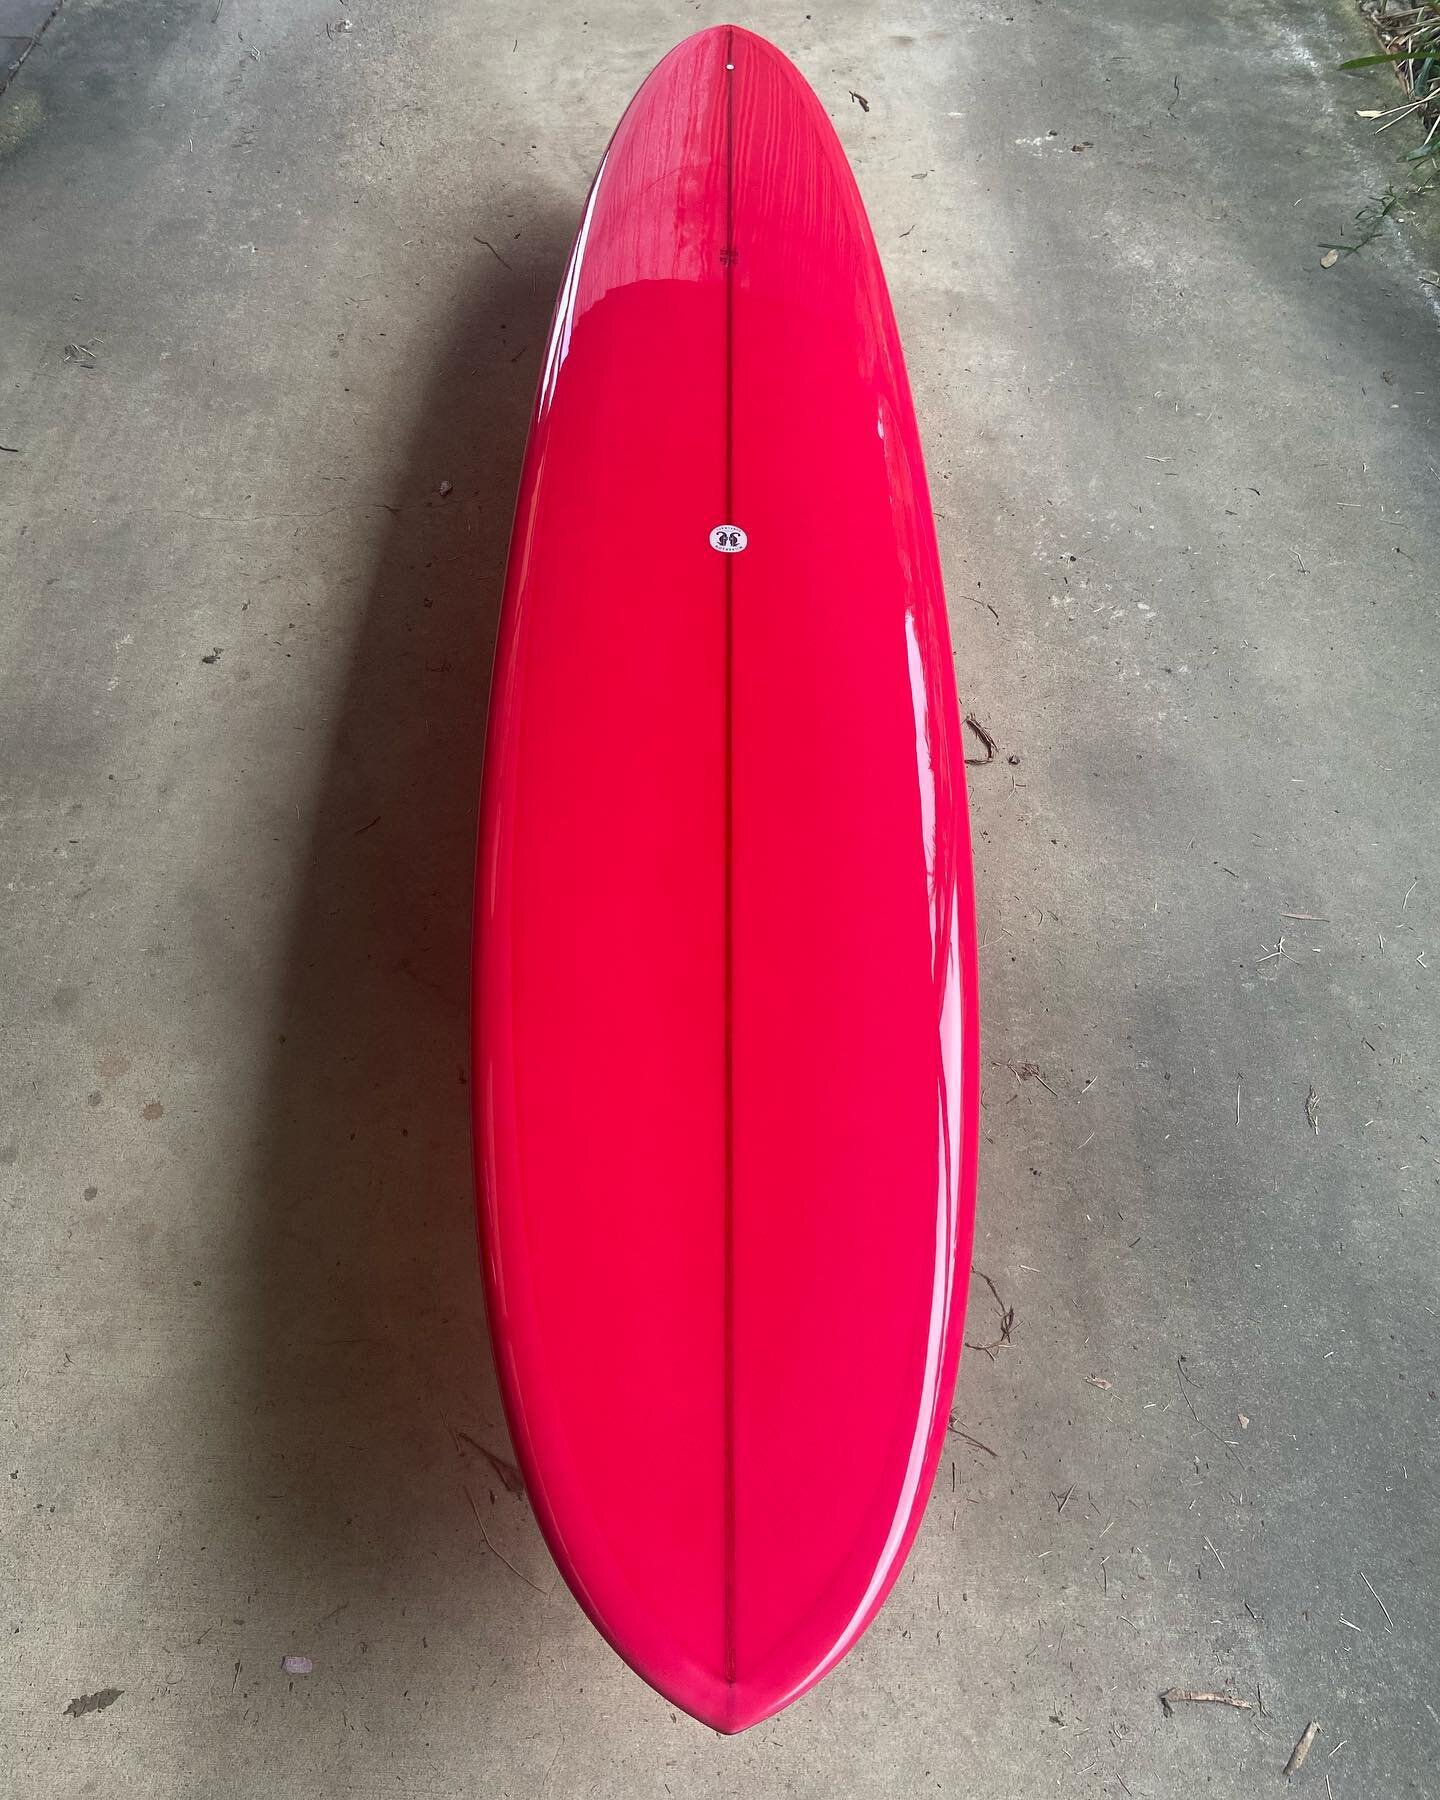 9&rsquo;2&rdquo; &bull; Le Mans &bull; speed shape design with balance rocker, low rails, rolled vee bottom split by single nose concave, single fin fcs box glassed in a combination 7.5 ounce + 6 ounce cloth, white opaque cutlap bottom, red tint cutl